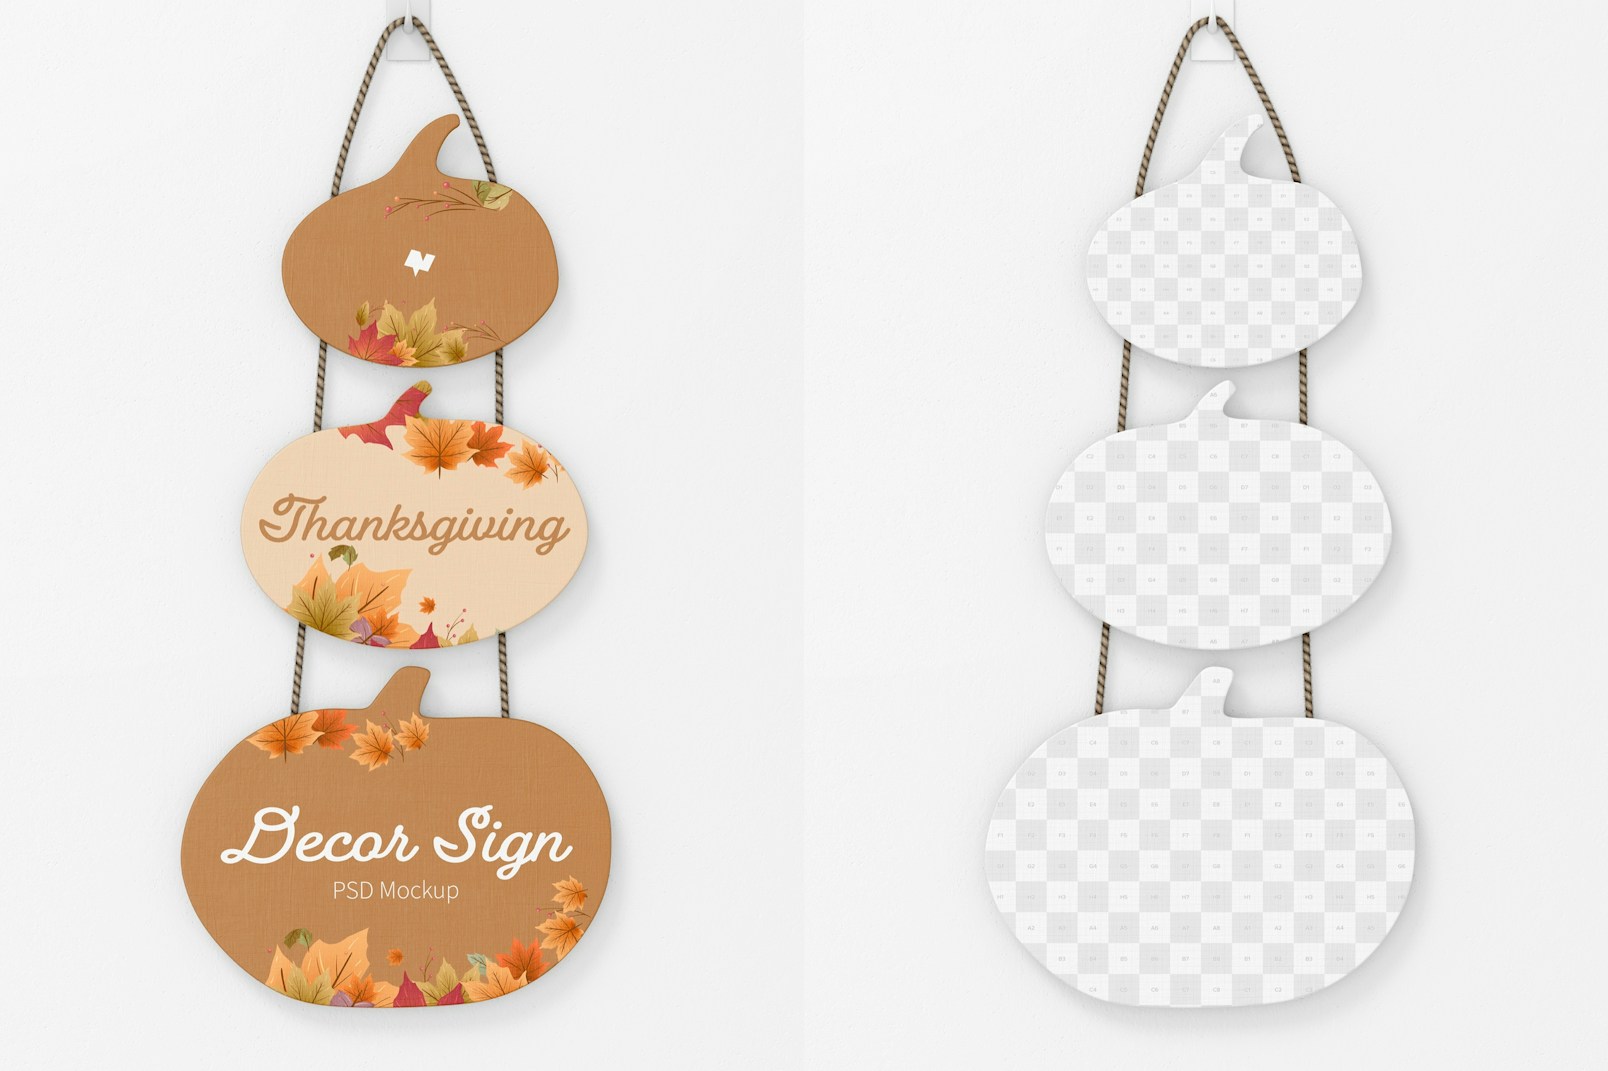 Thanksgiving Wall Decor Sign Mockup, Front View